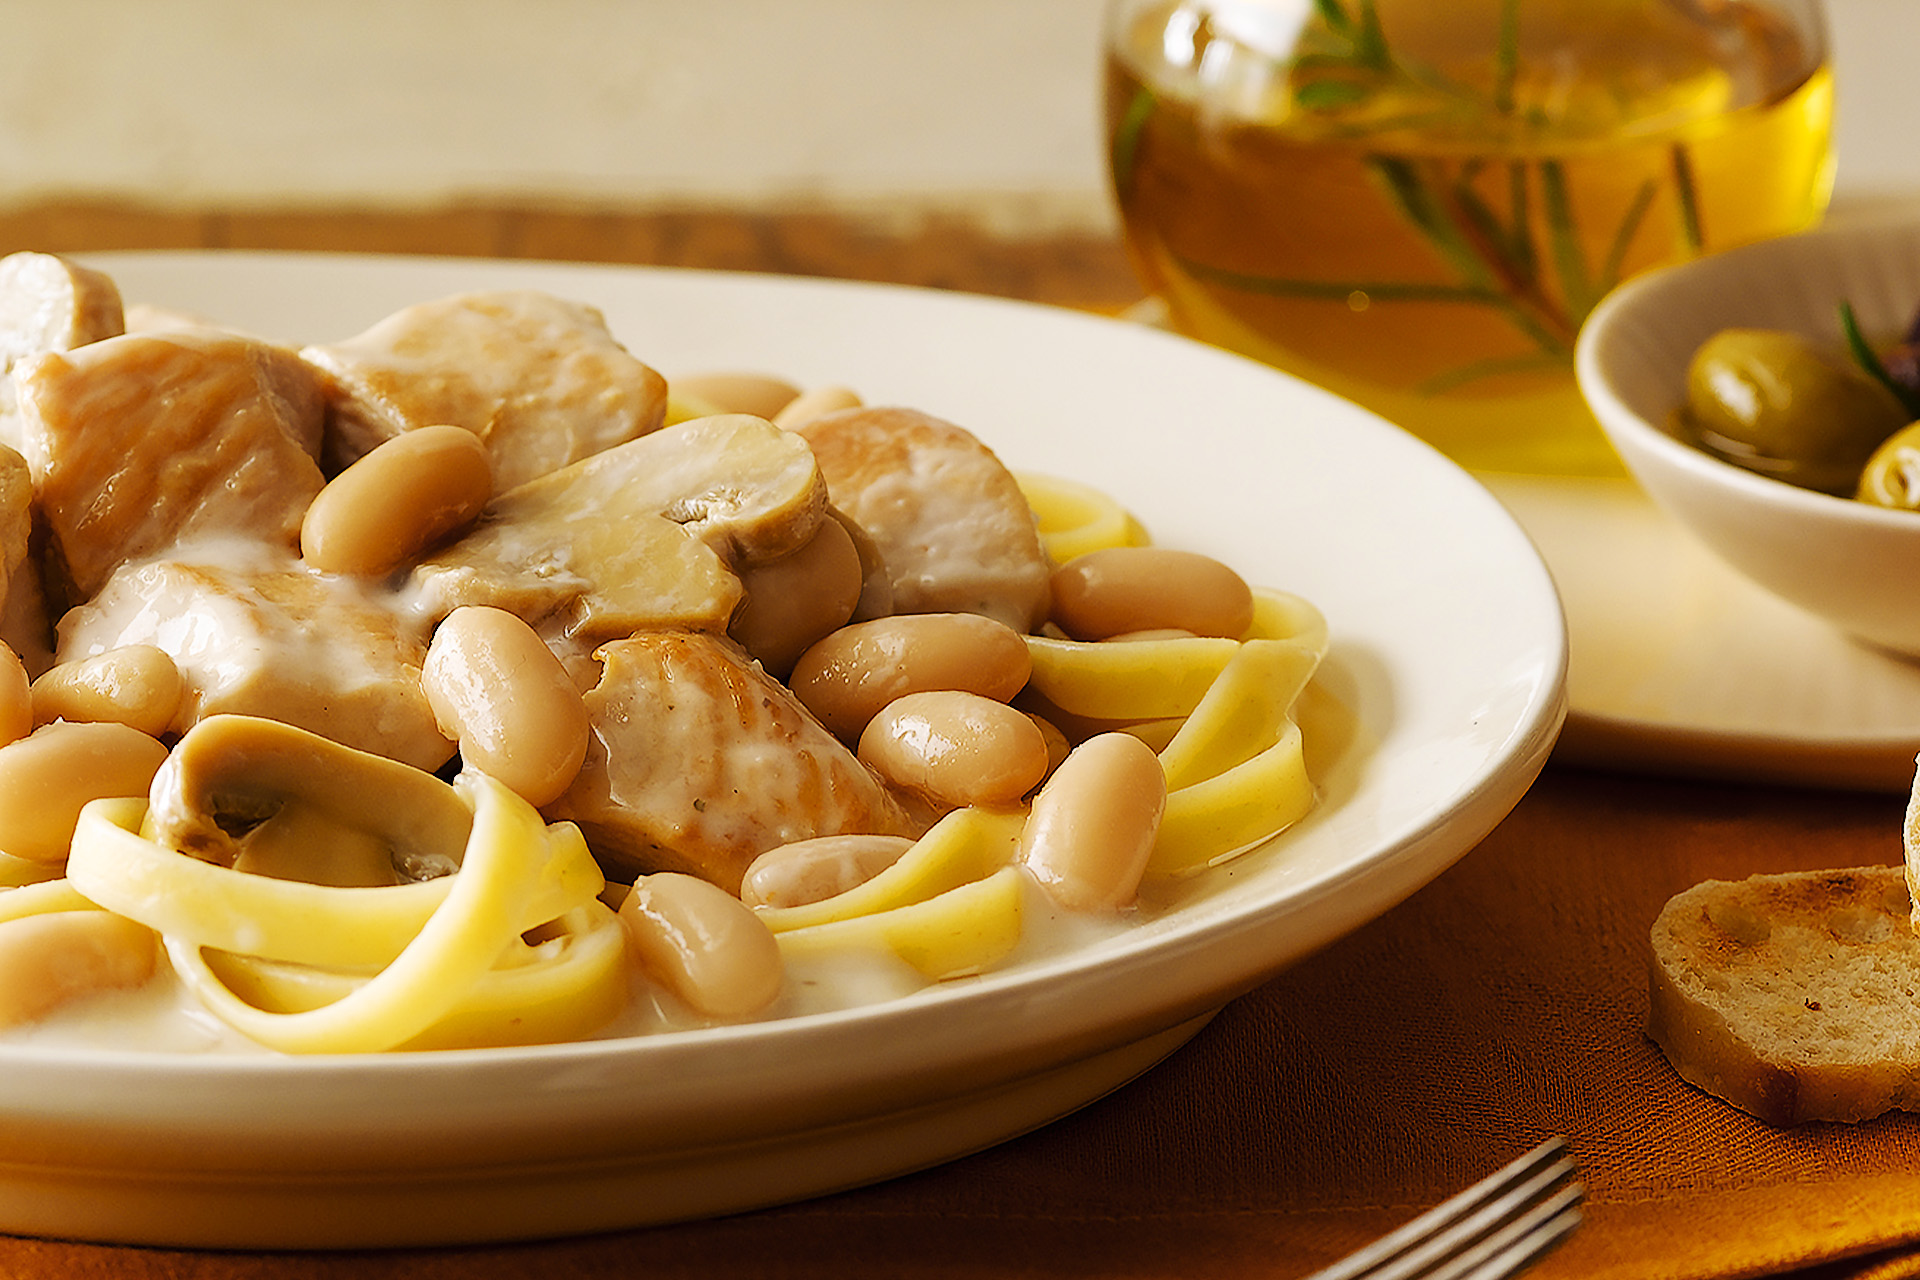 Creamy Tuscan Chicken and Mushrooms with cannellini beans over past on white plate